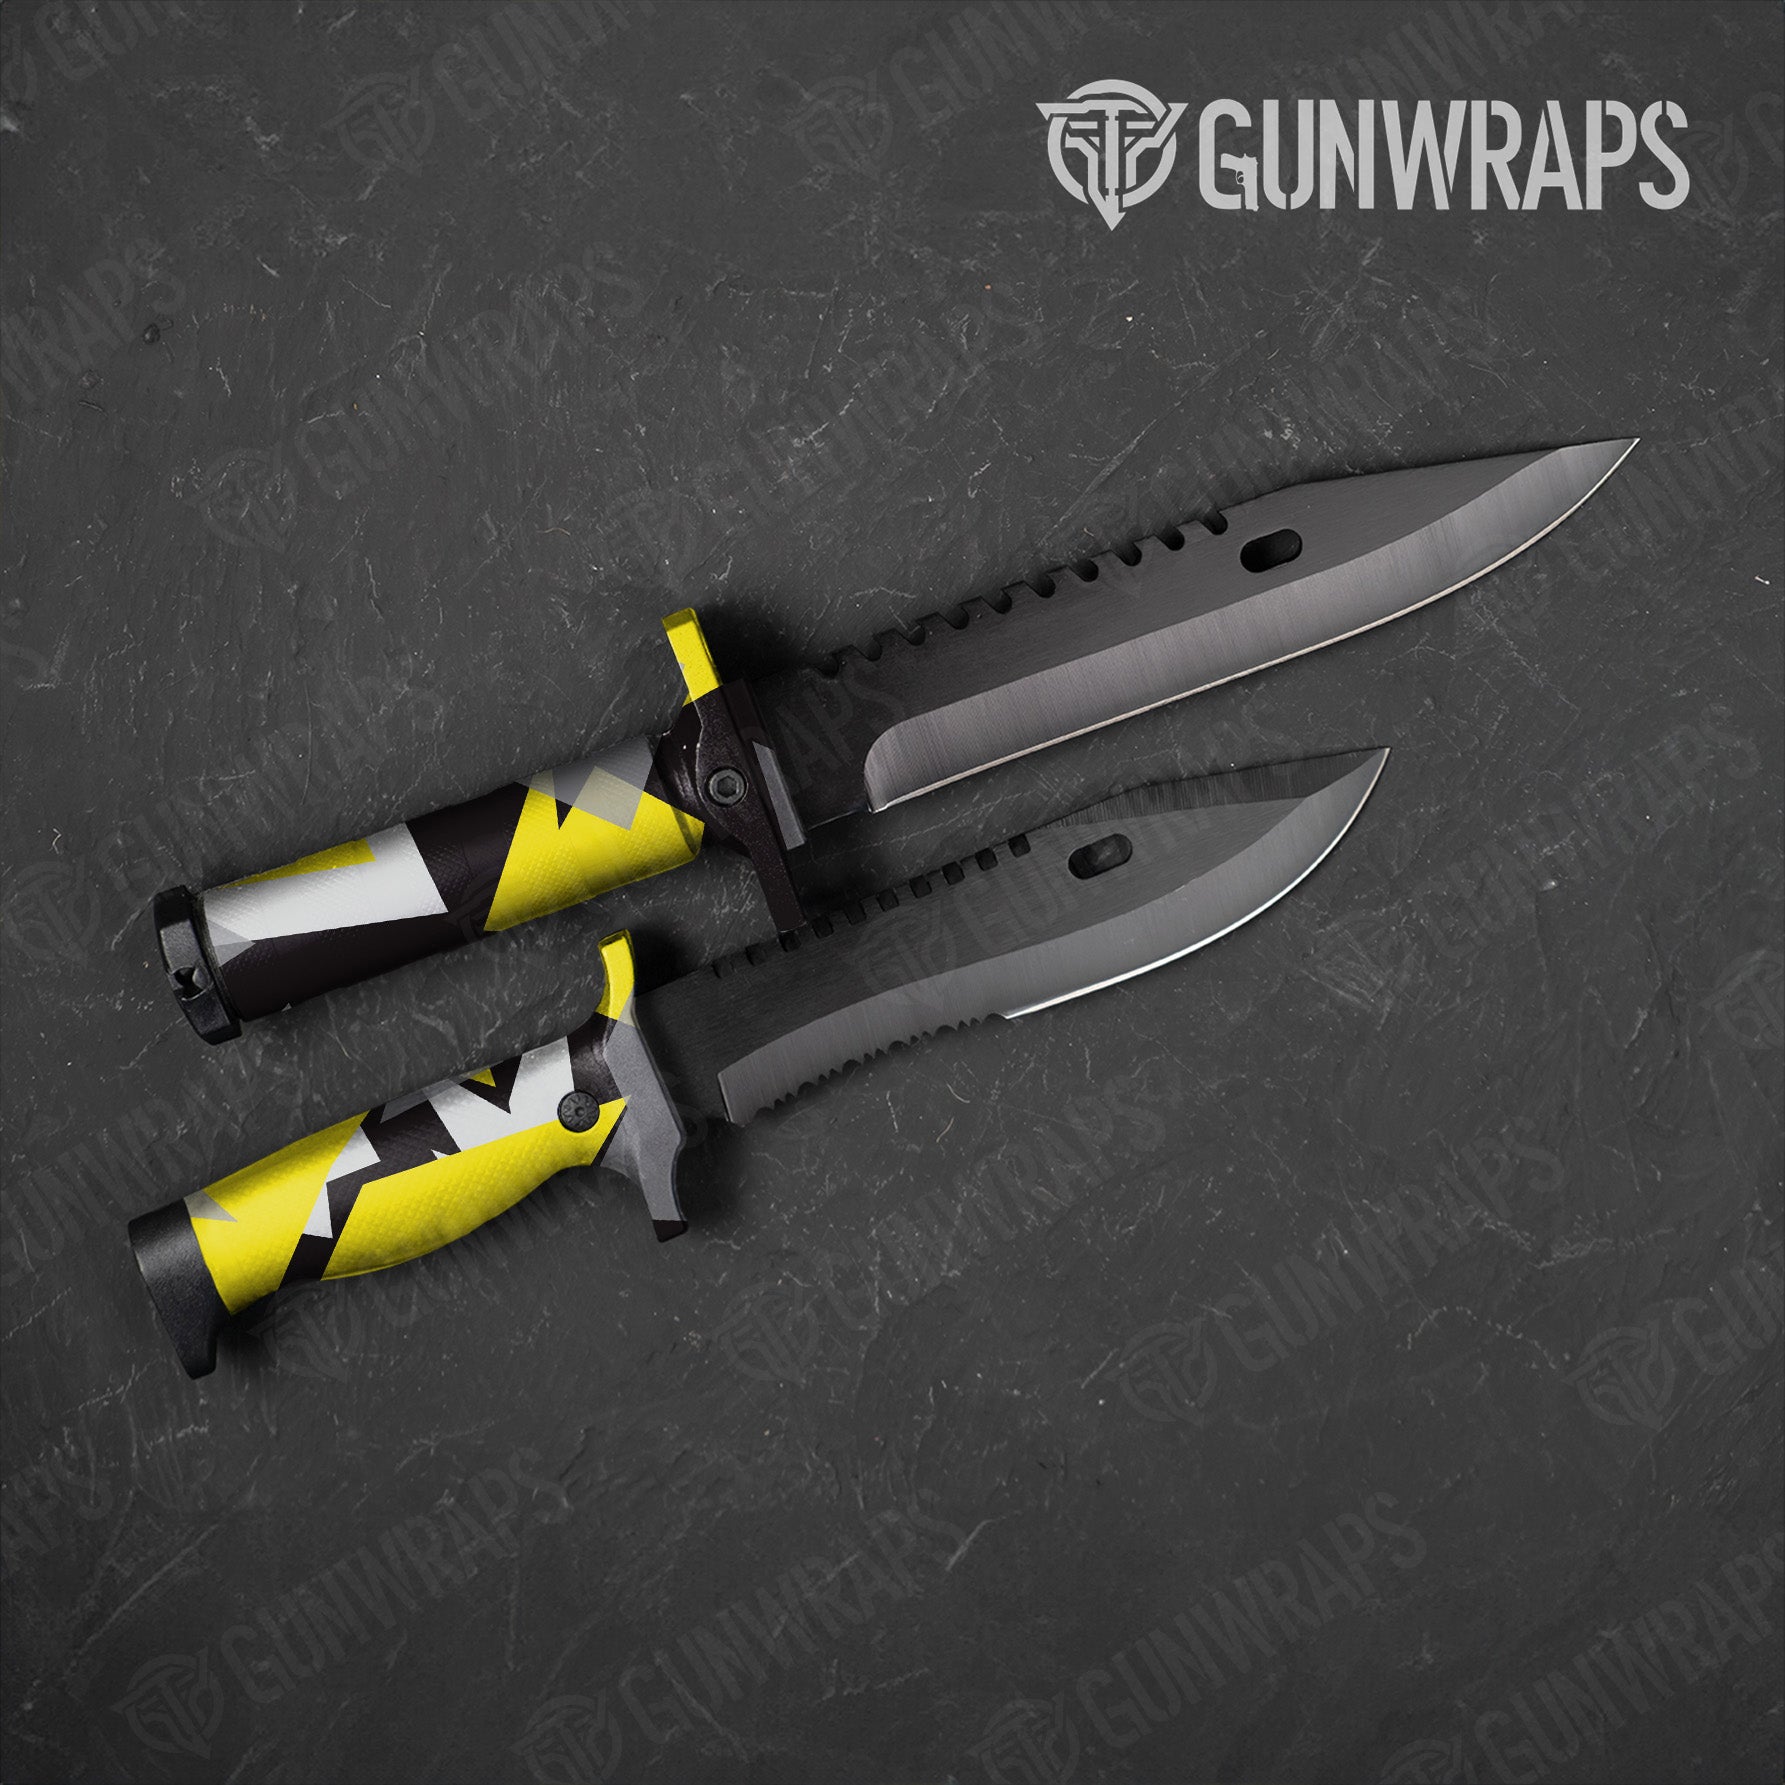 Shattered Yellow Tiger Camo Knife Gear Skin Vinyl Wrap